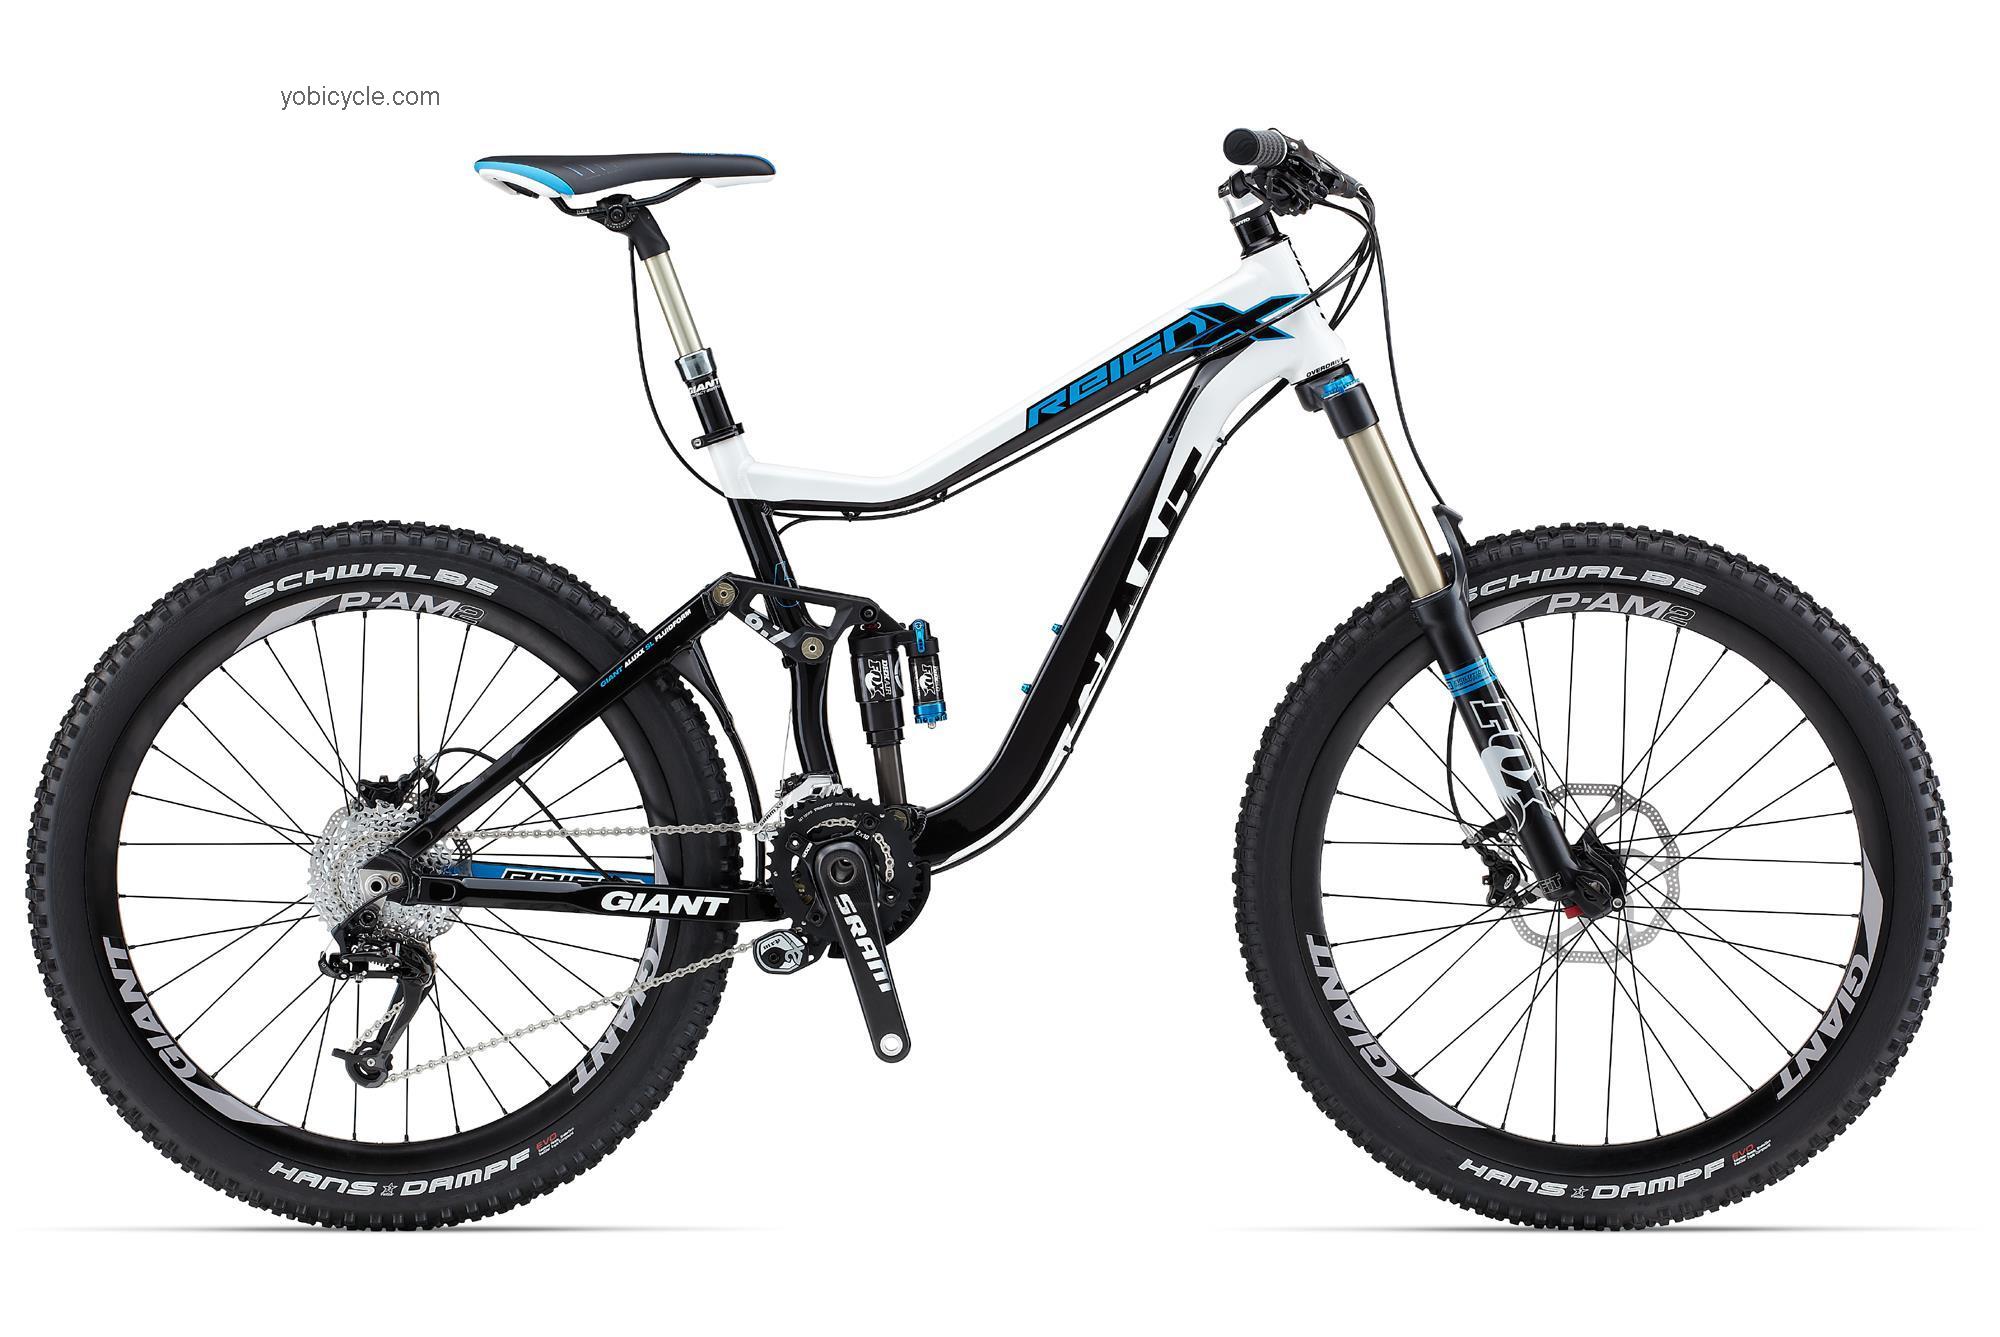 Giant Reign X0 2013 comparison online with competitors